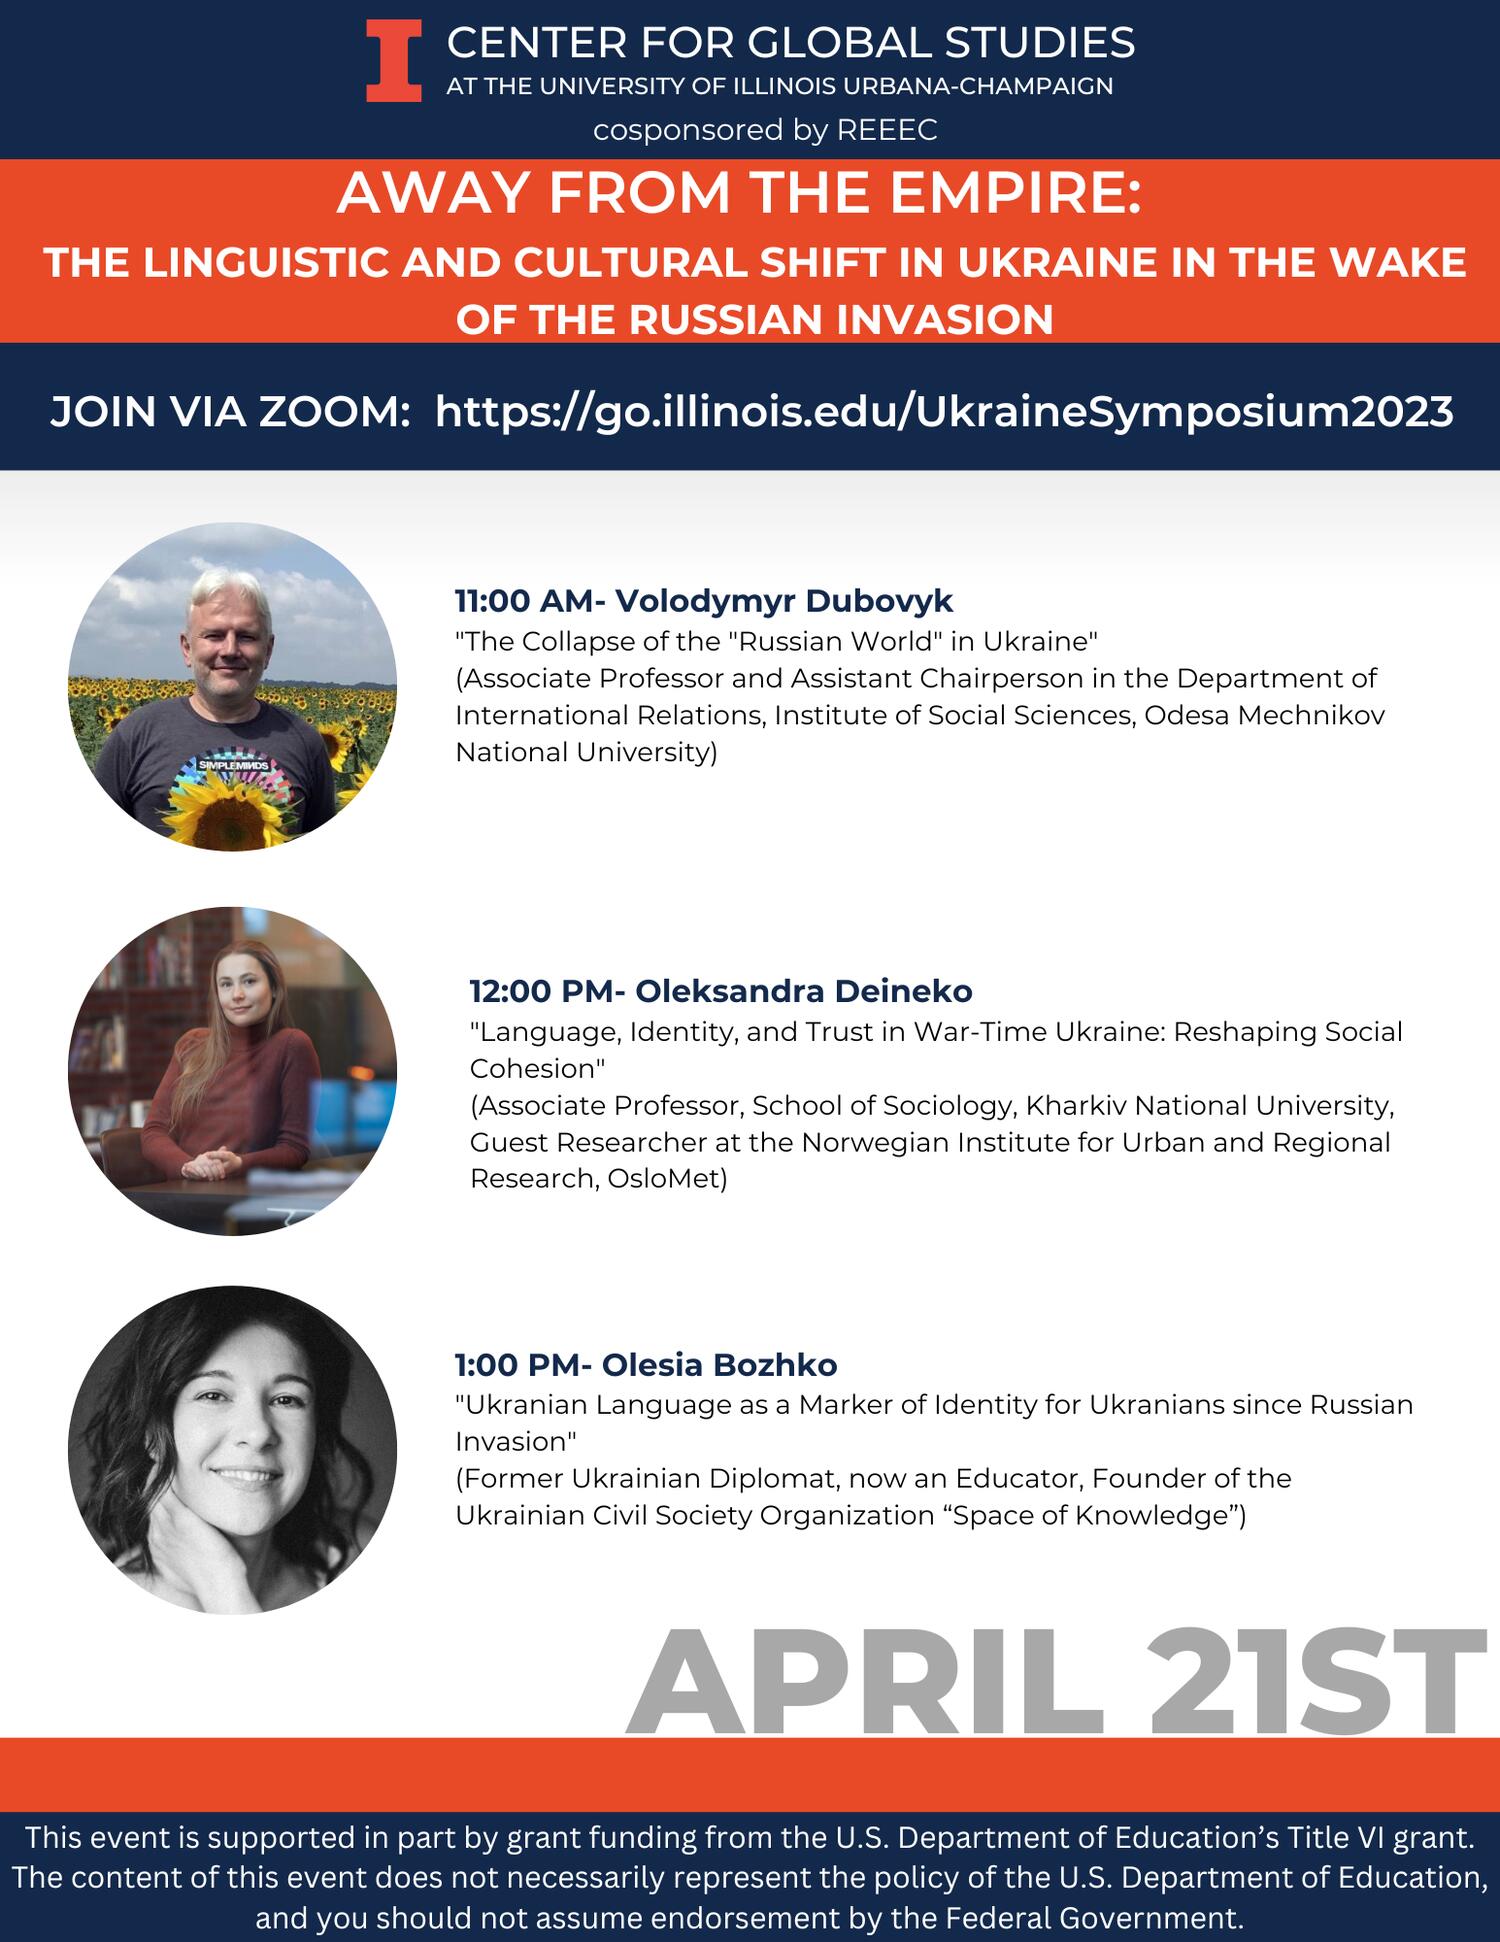 April 21 at 11:00 AM  "The Collapse of the "Russian World" in Ukraine.” This is presented by Volodymyr Dubovyk. At 12:00 PM  "Language, Identity, and Trust in War-Time Ukraine: Reshaping Social Cohesion" presented by Oleksandra Deineko. At 1:00 PM, "Ukrainian Language as a Marker of Identity for Ukrainians since Russian Invasion" presented by Olesia Bozhko. This event is supported in part by grant funding from the U.S. Department of Education's Title VI grant. 